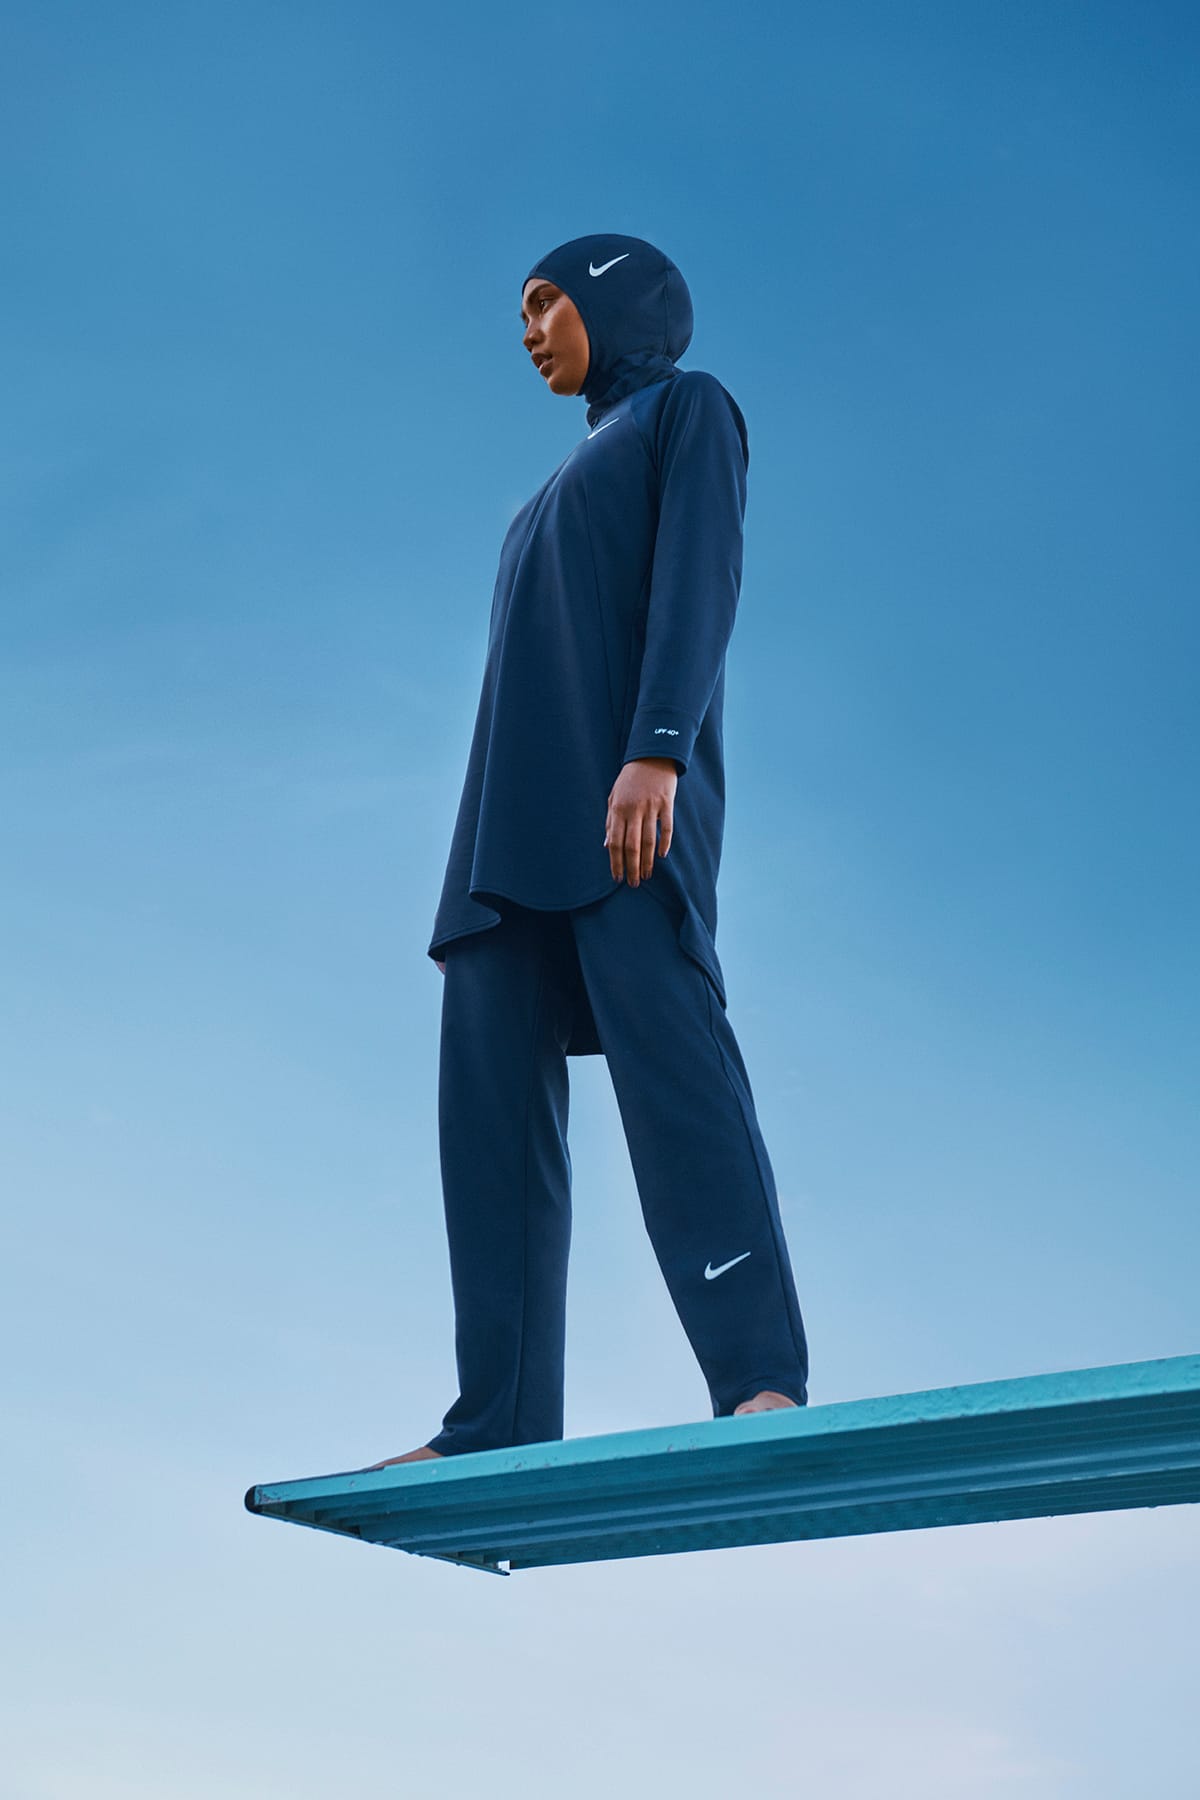 Nike Introduces Full-Coverage Hijab 